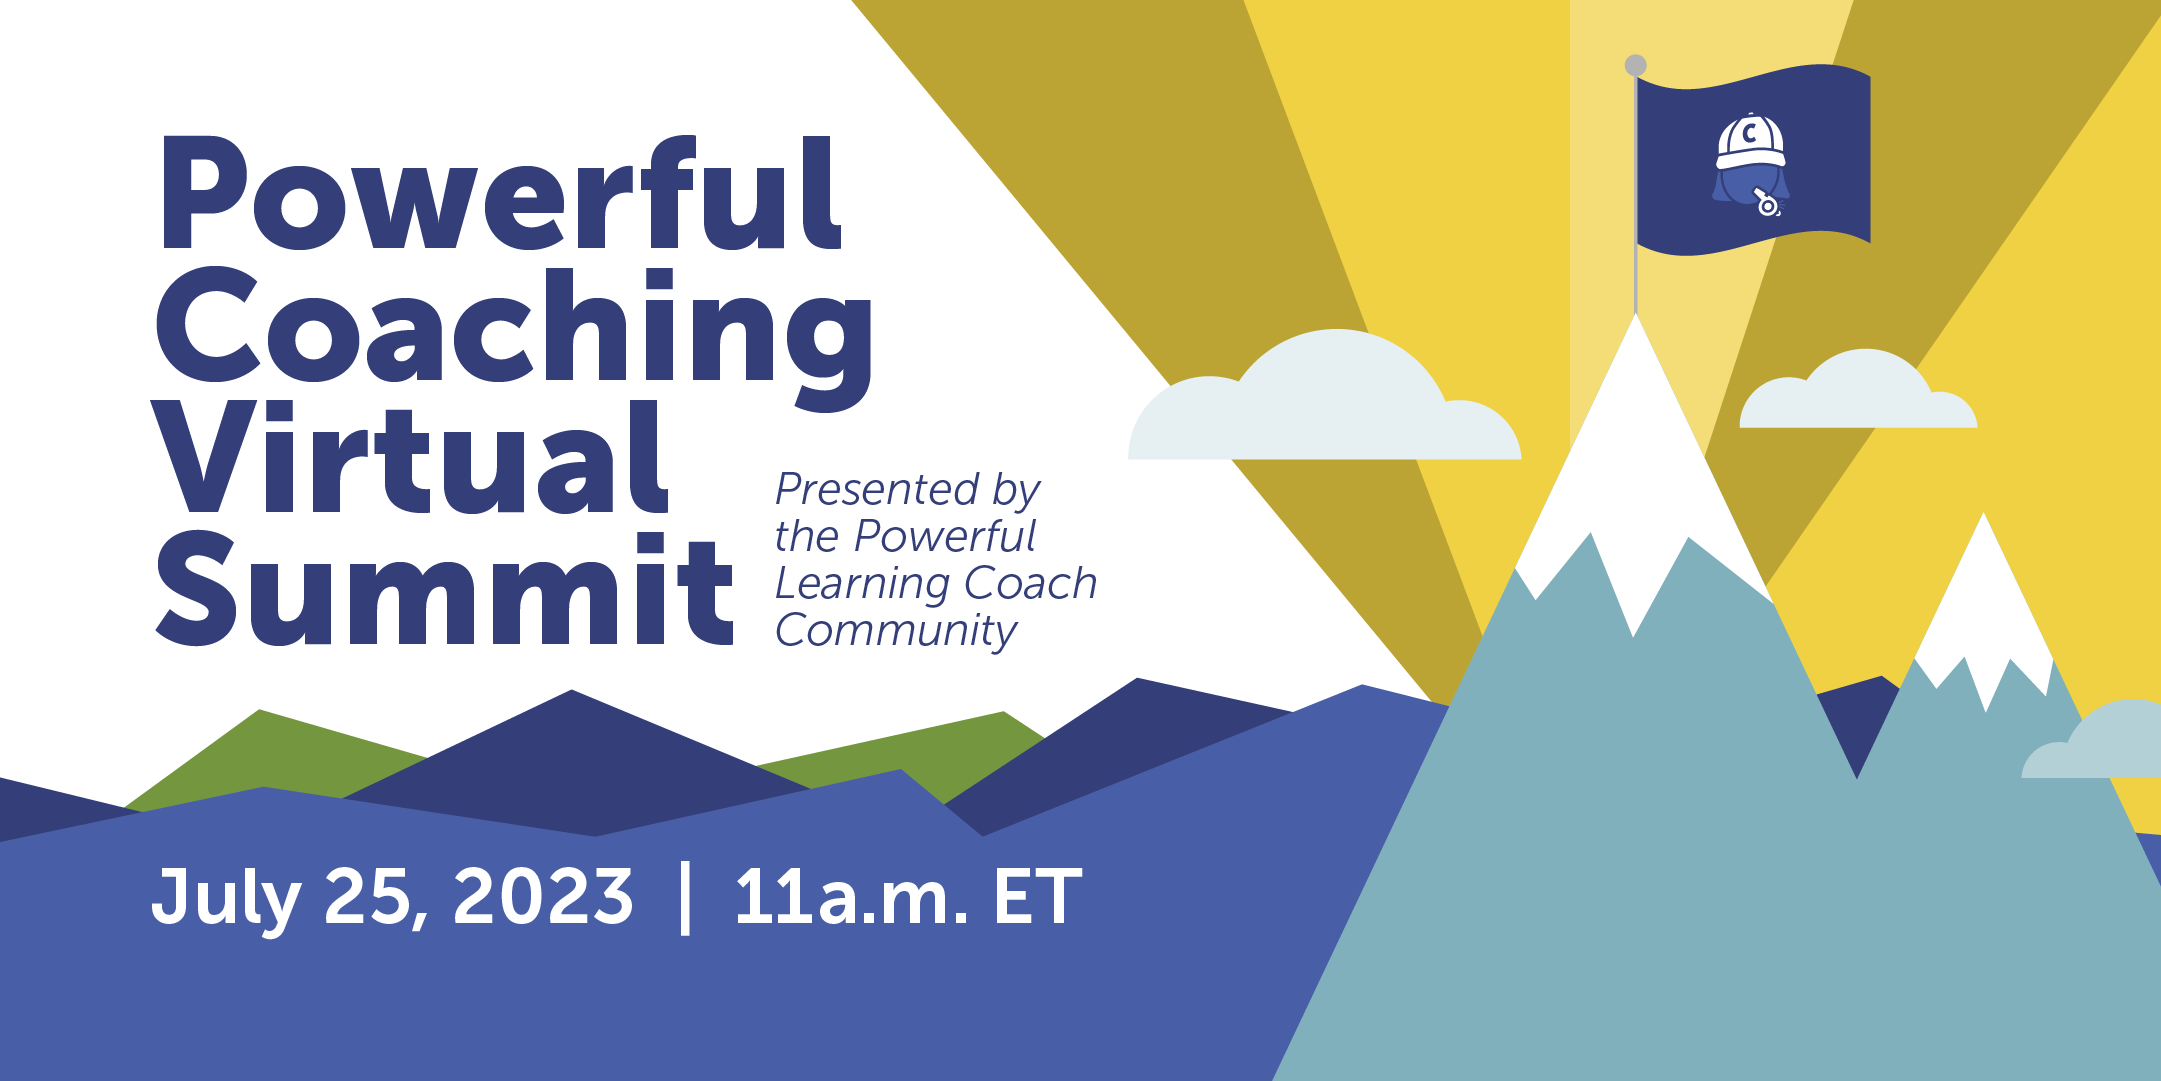 Illustration of mountains with a flag planted at the peak of the tallest one. Text reads: Powerful Coaching Virtual Summit, Presented by the Powerful Learning Coach Community. July 25, 11:00 a.m. ET